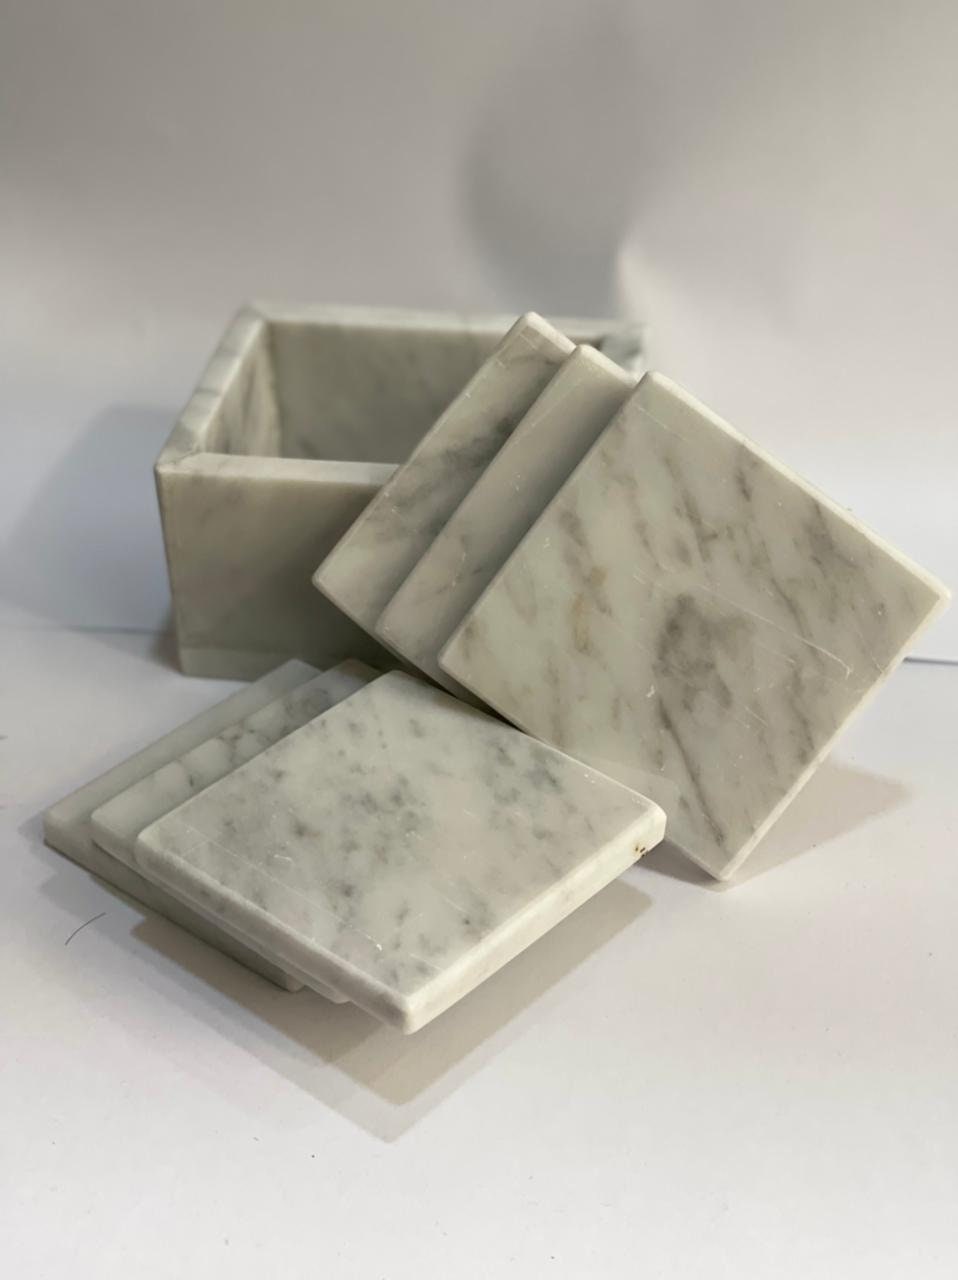 Authentic, Handcrafted Marble Coasters with a Marble Holder, Set of 6 Marble Coaster with Holder, Comes in a Bespoke Gift Box